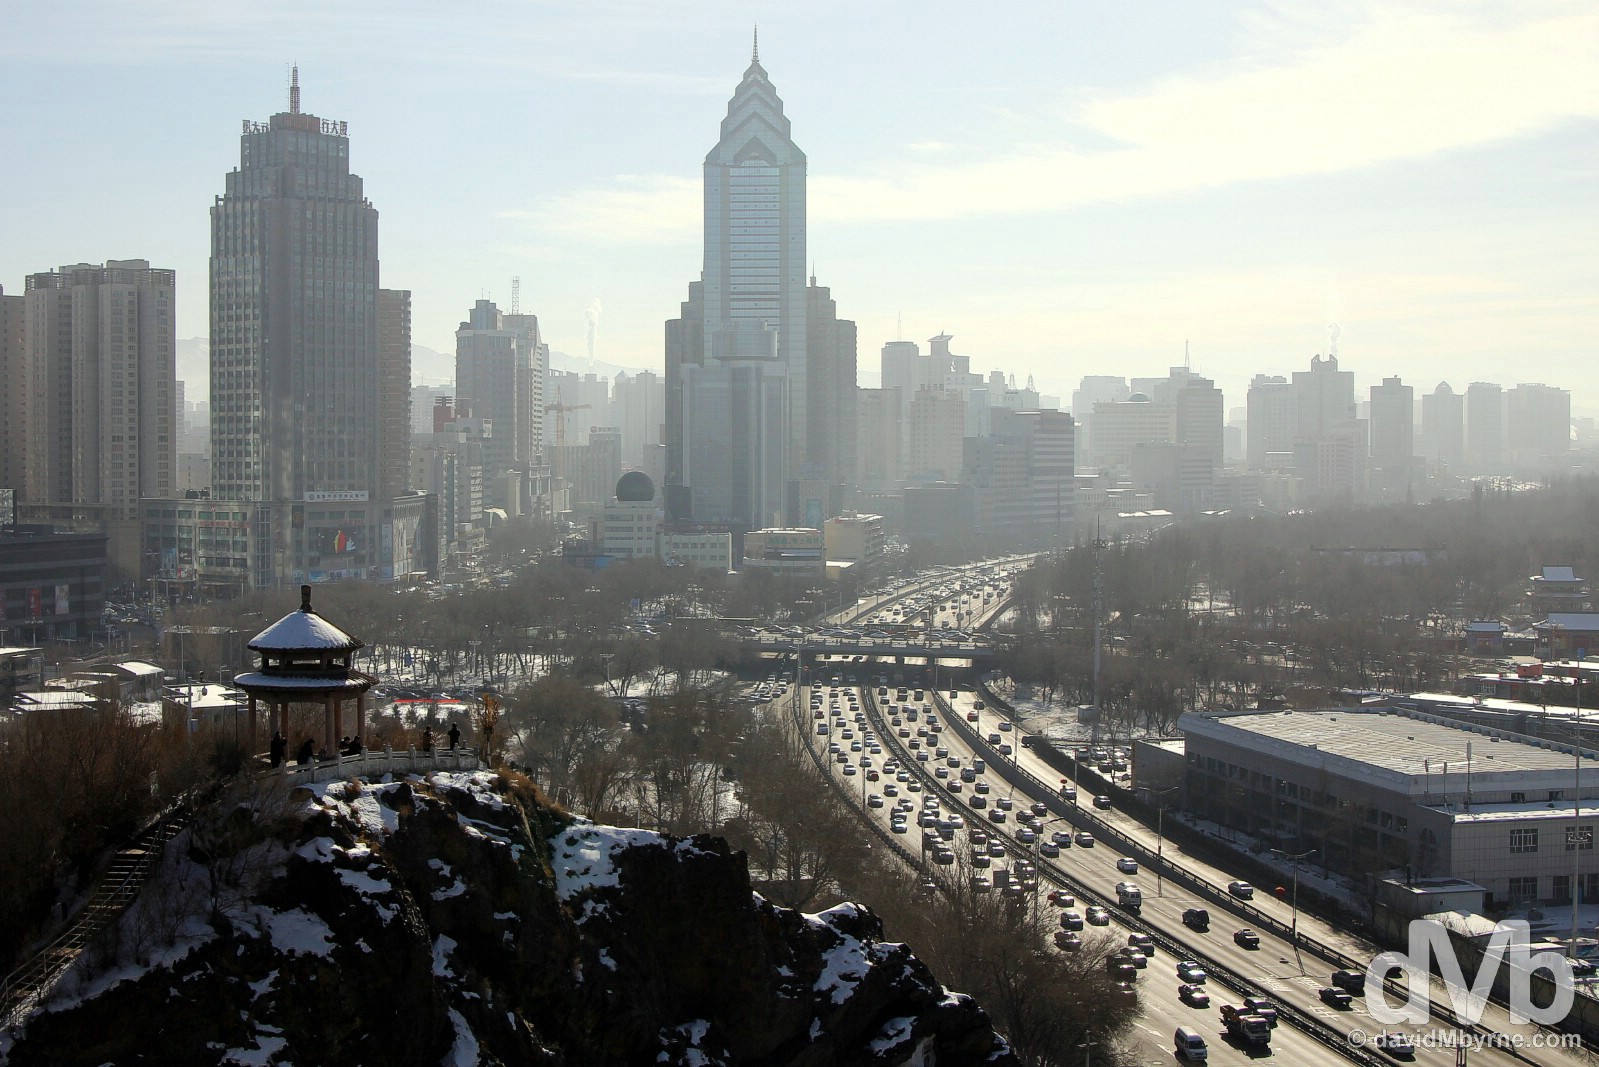 Urumqi as seen from the highest point in the city's Hongshan (Red Hill) Park. Urumqi, northwestern China. February 11, 2015.